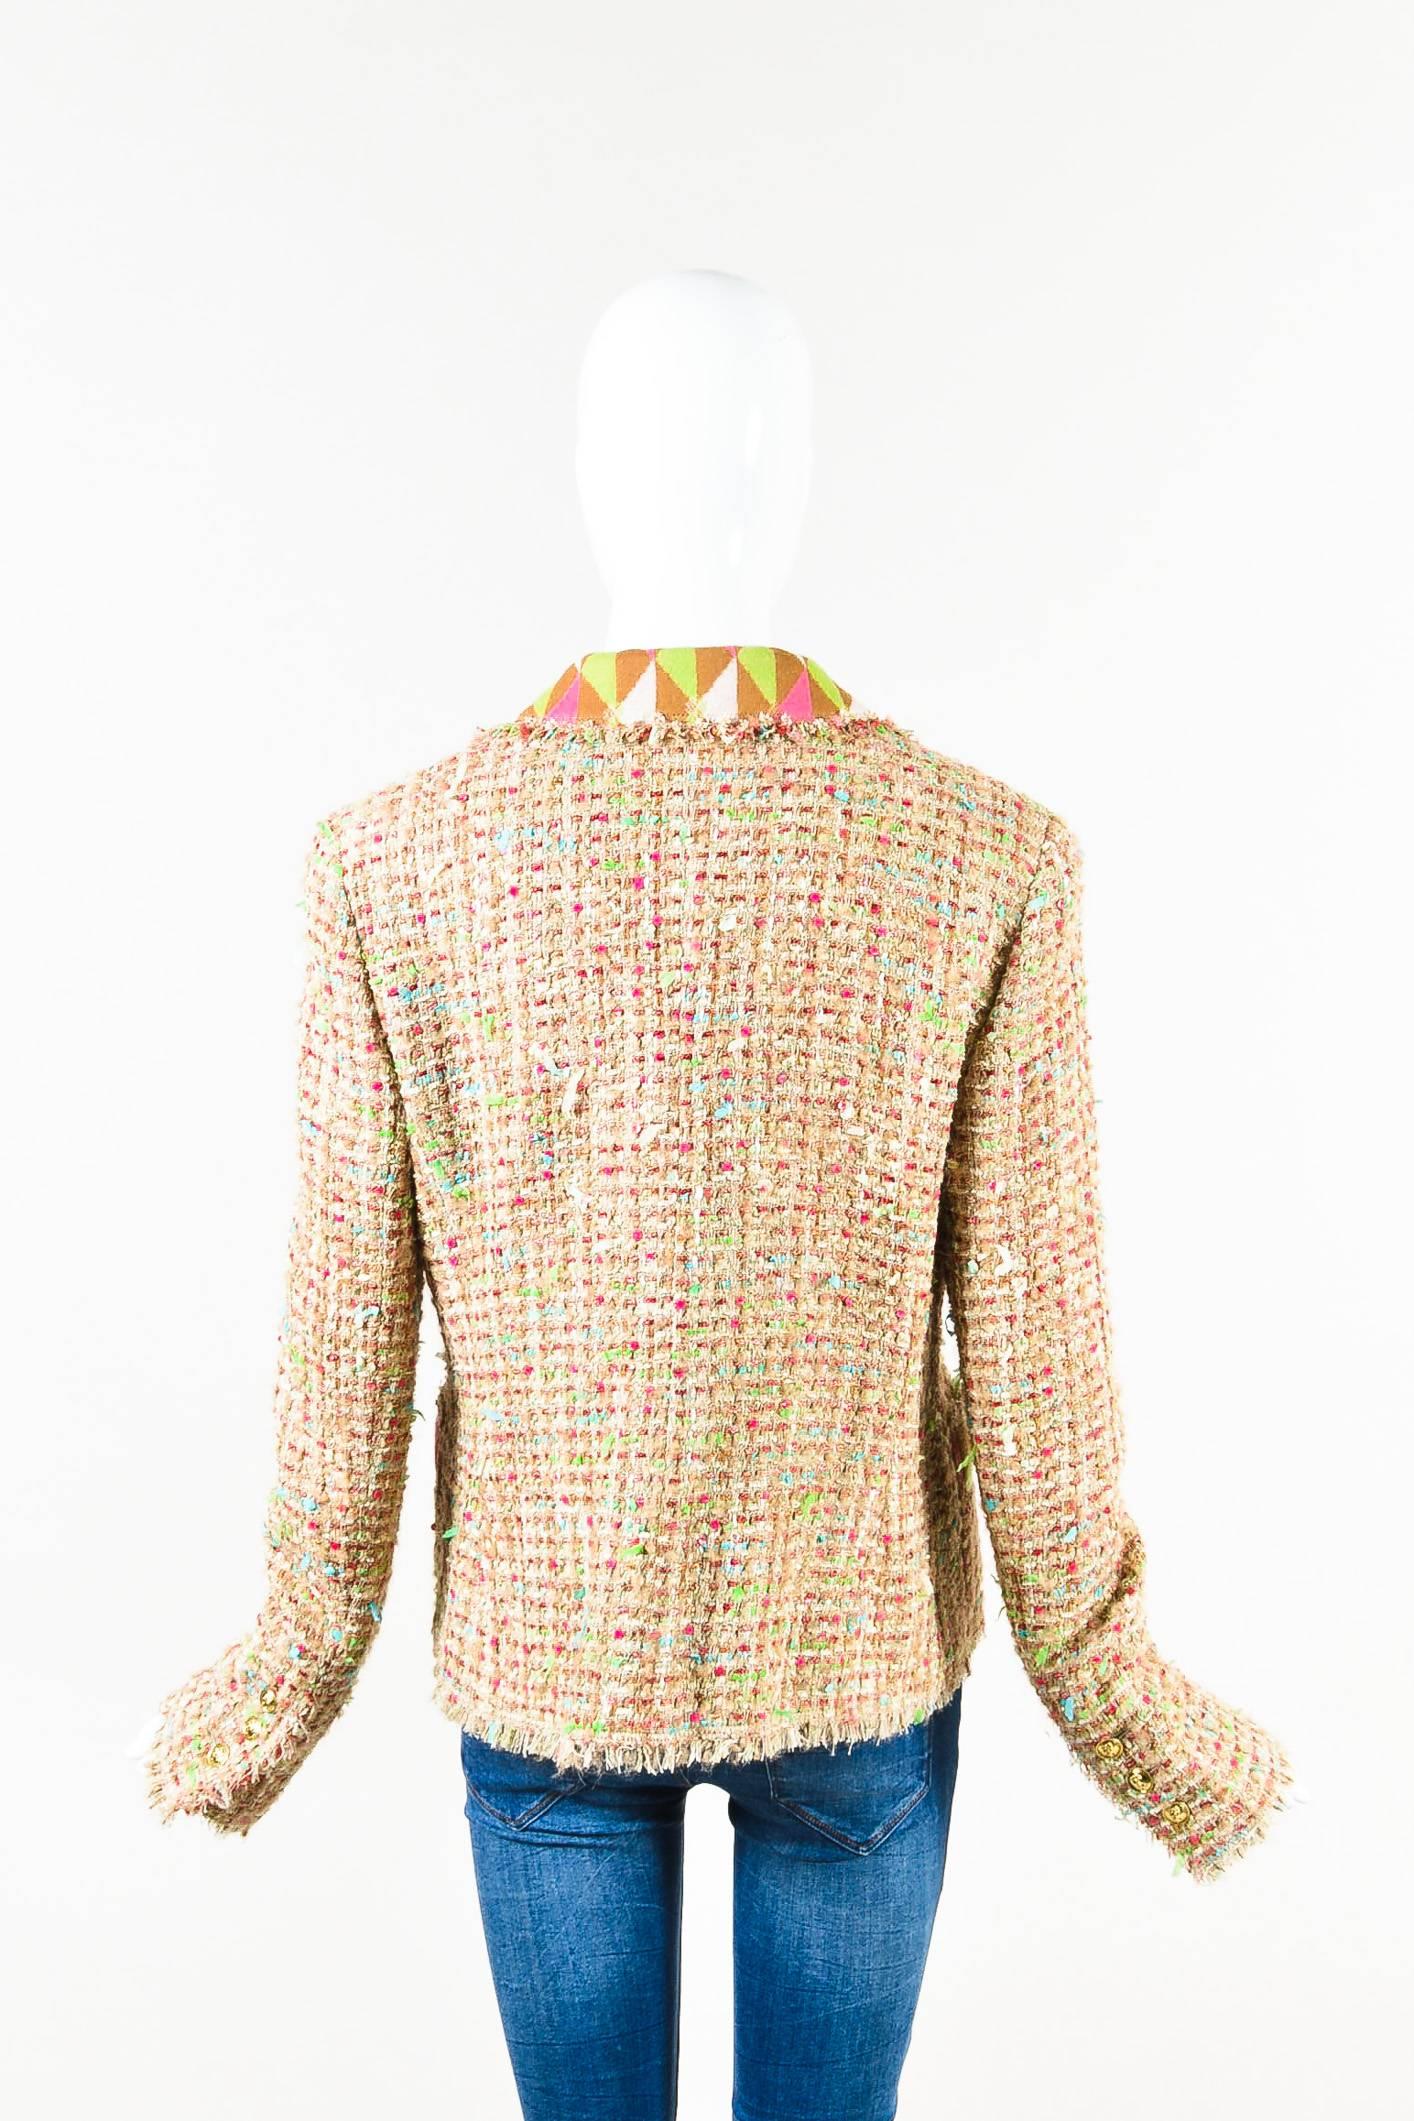 Tan multicolor wool tweed long sleeve collared jacket from Chanel features a frayed trim throughout. Triangle patterned textile on the collar and pockets. Two front open pockets. Flower pin on the lapel. Shoulder pads. No closures.